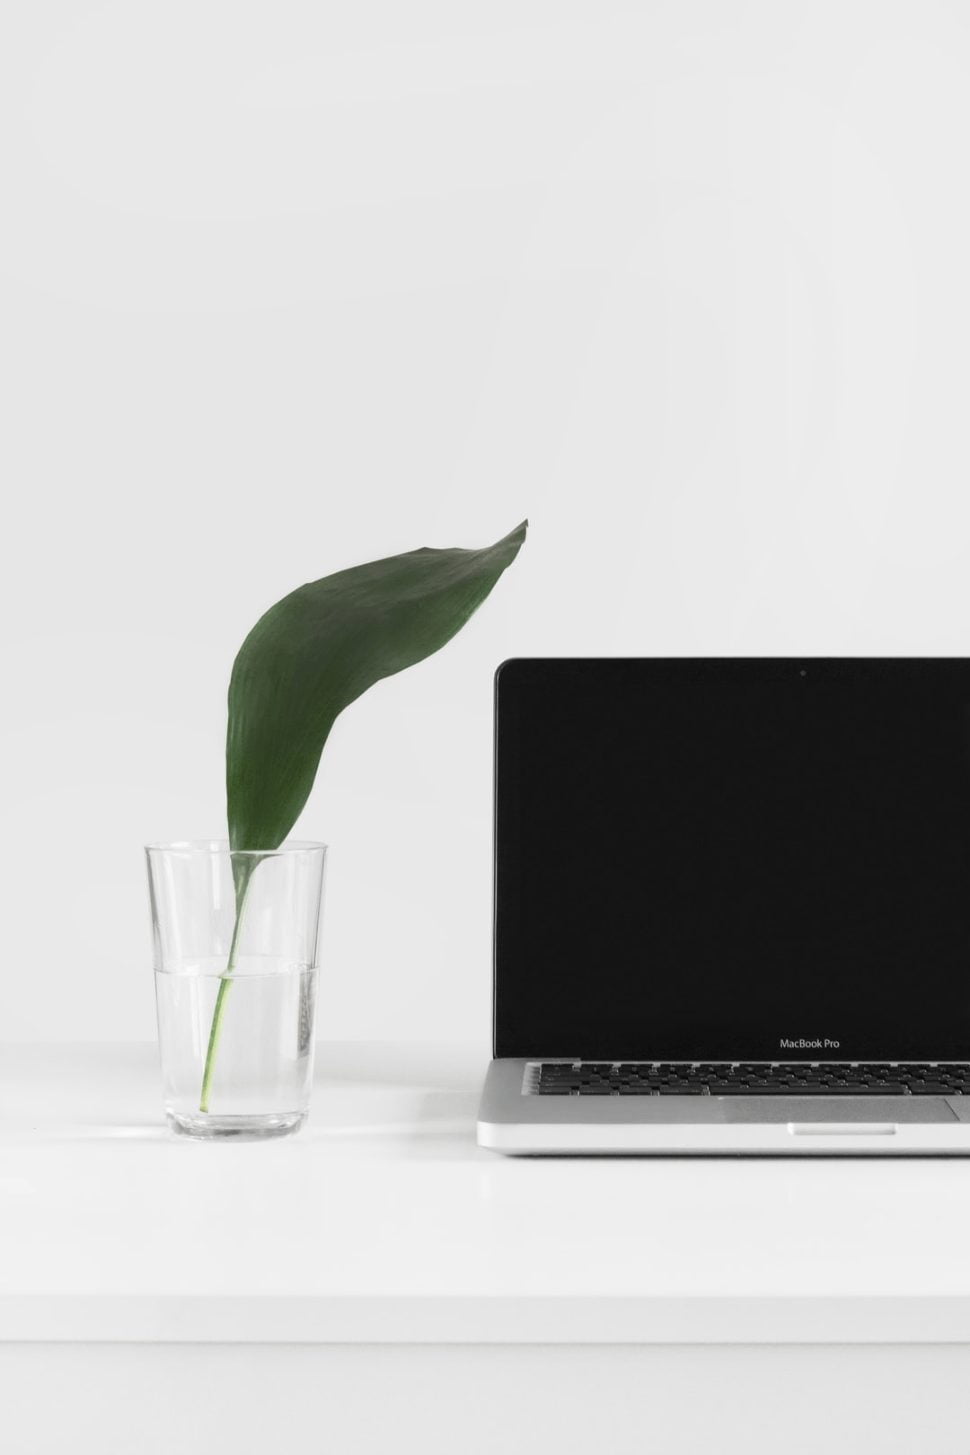 MacBook Pro beside plant in vase on white surface